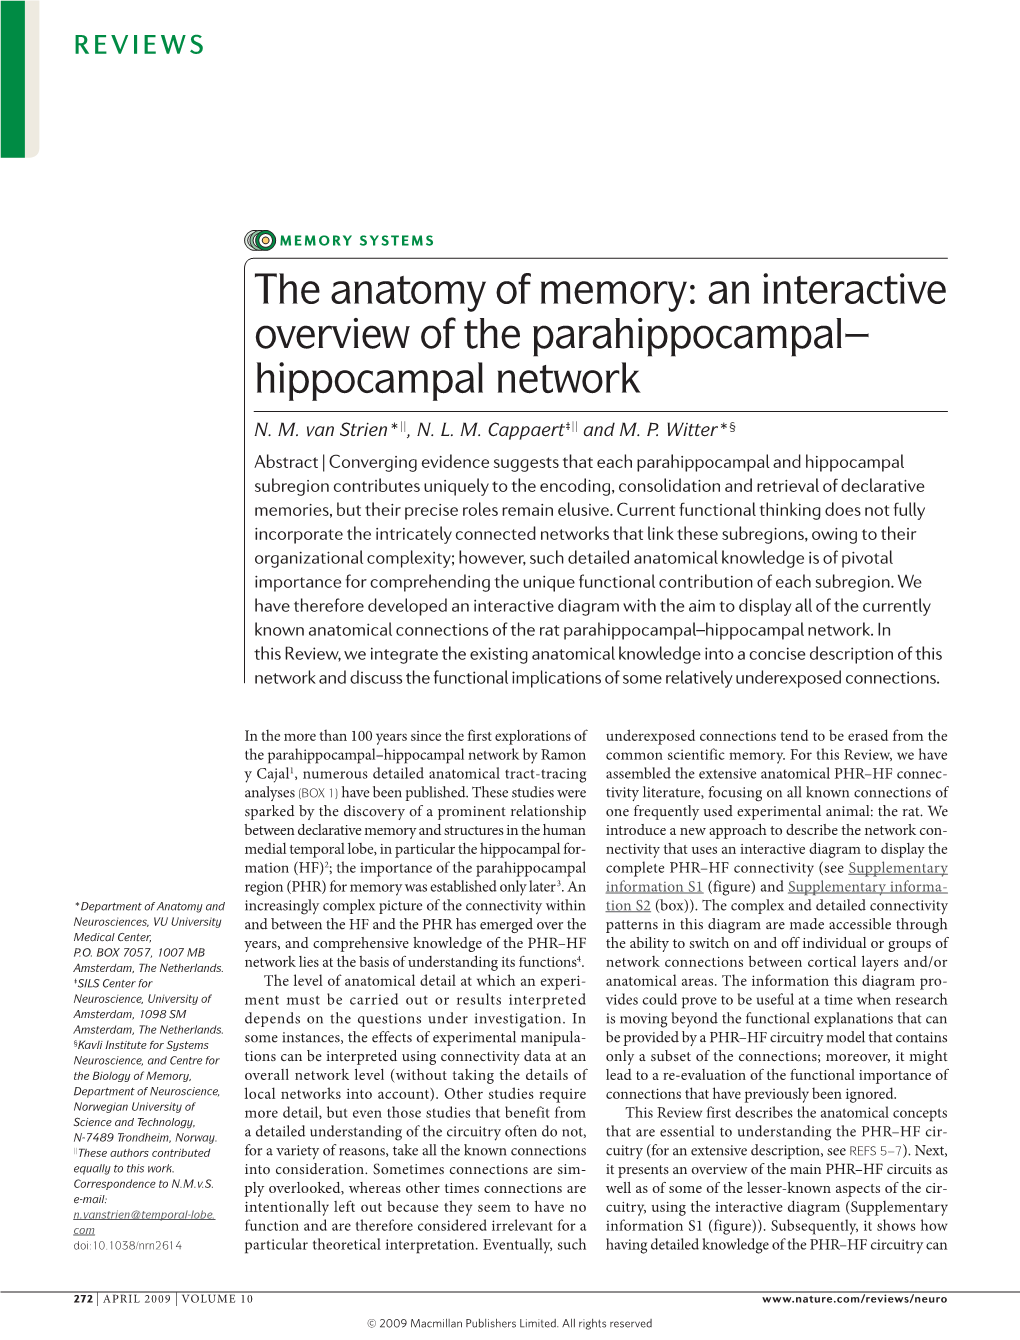 The Anatomy of Memory: an Interactive Overview of the Parahippocampal– Hippocampal Network